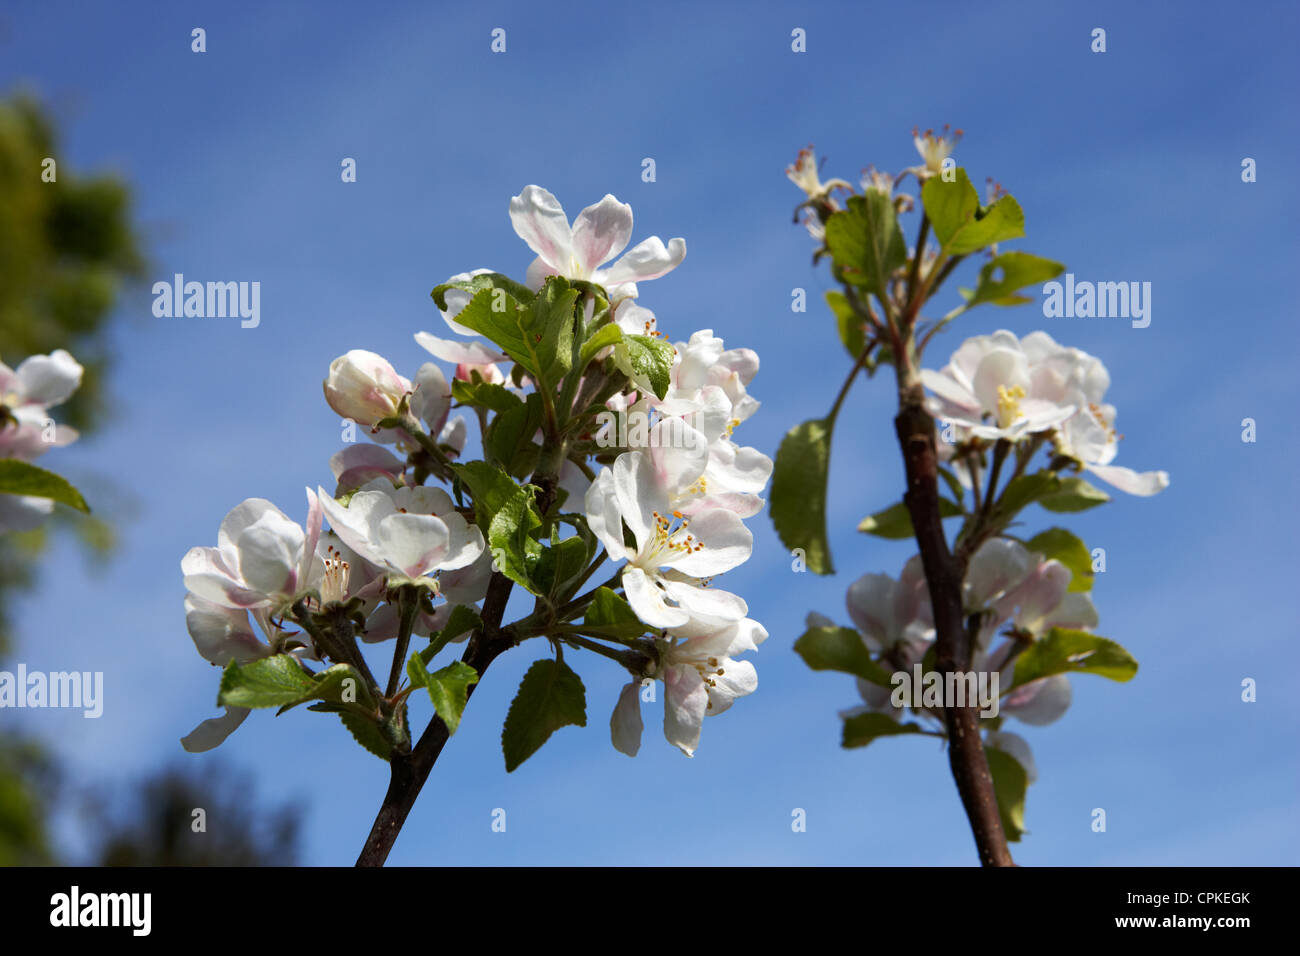 apple blossoms on a discovery apple tree Stock Photo